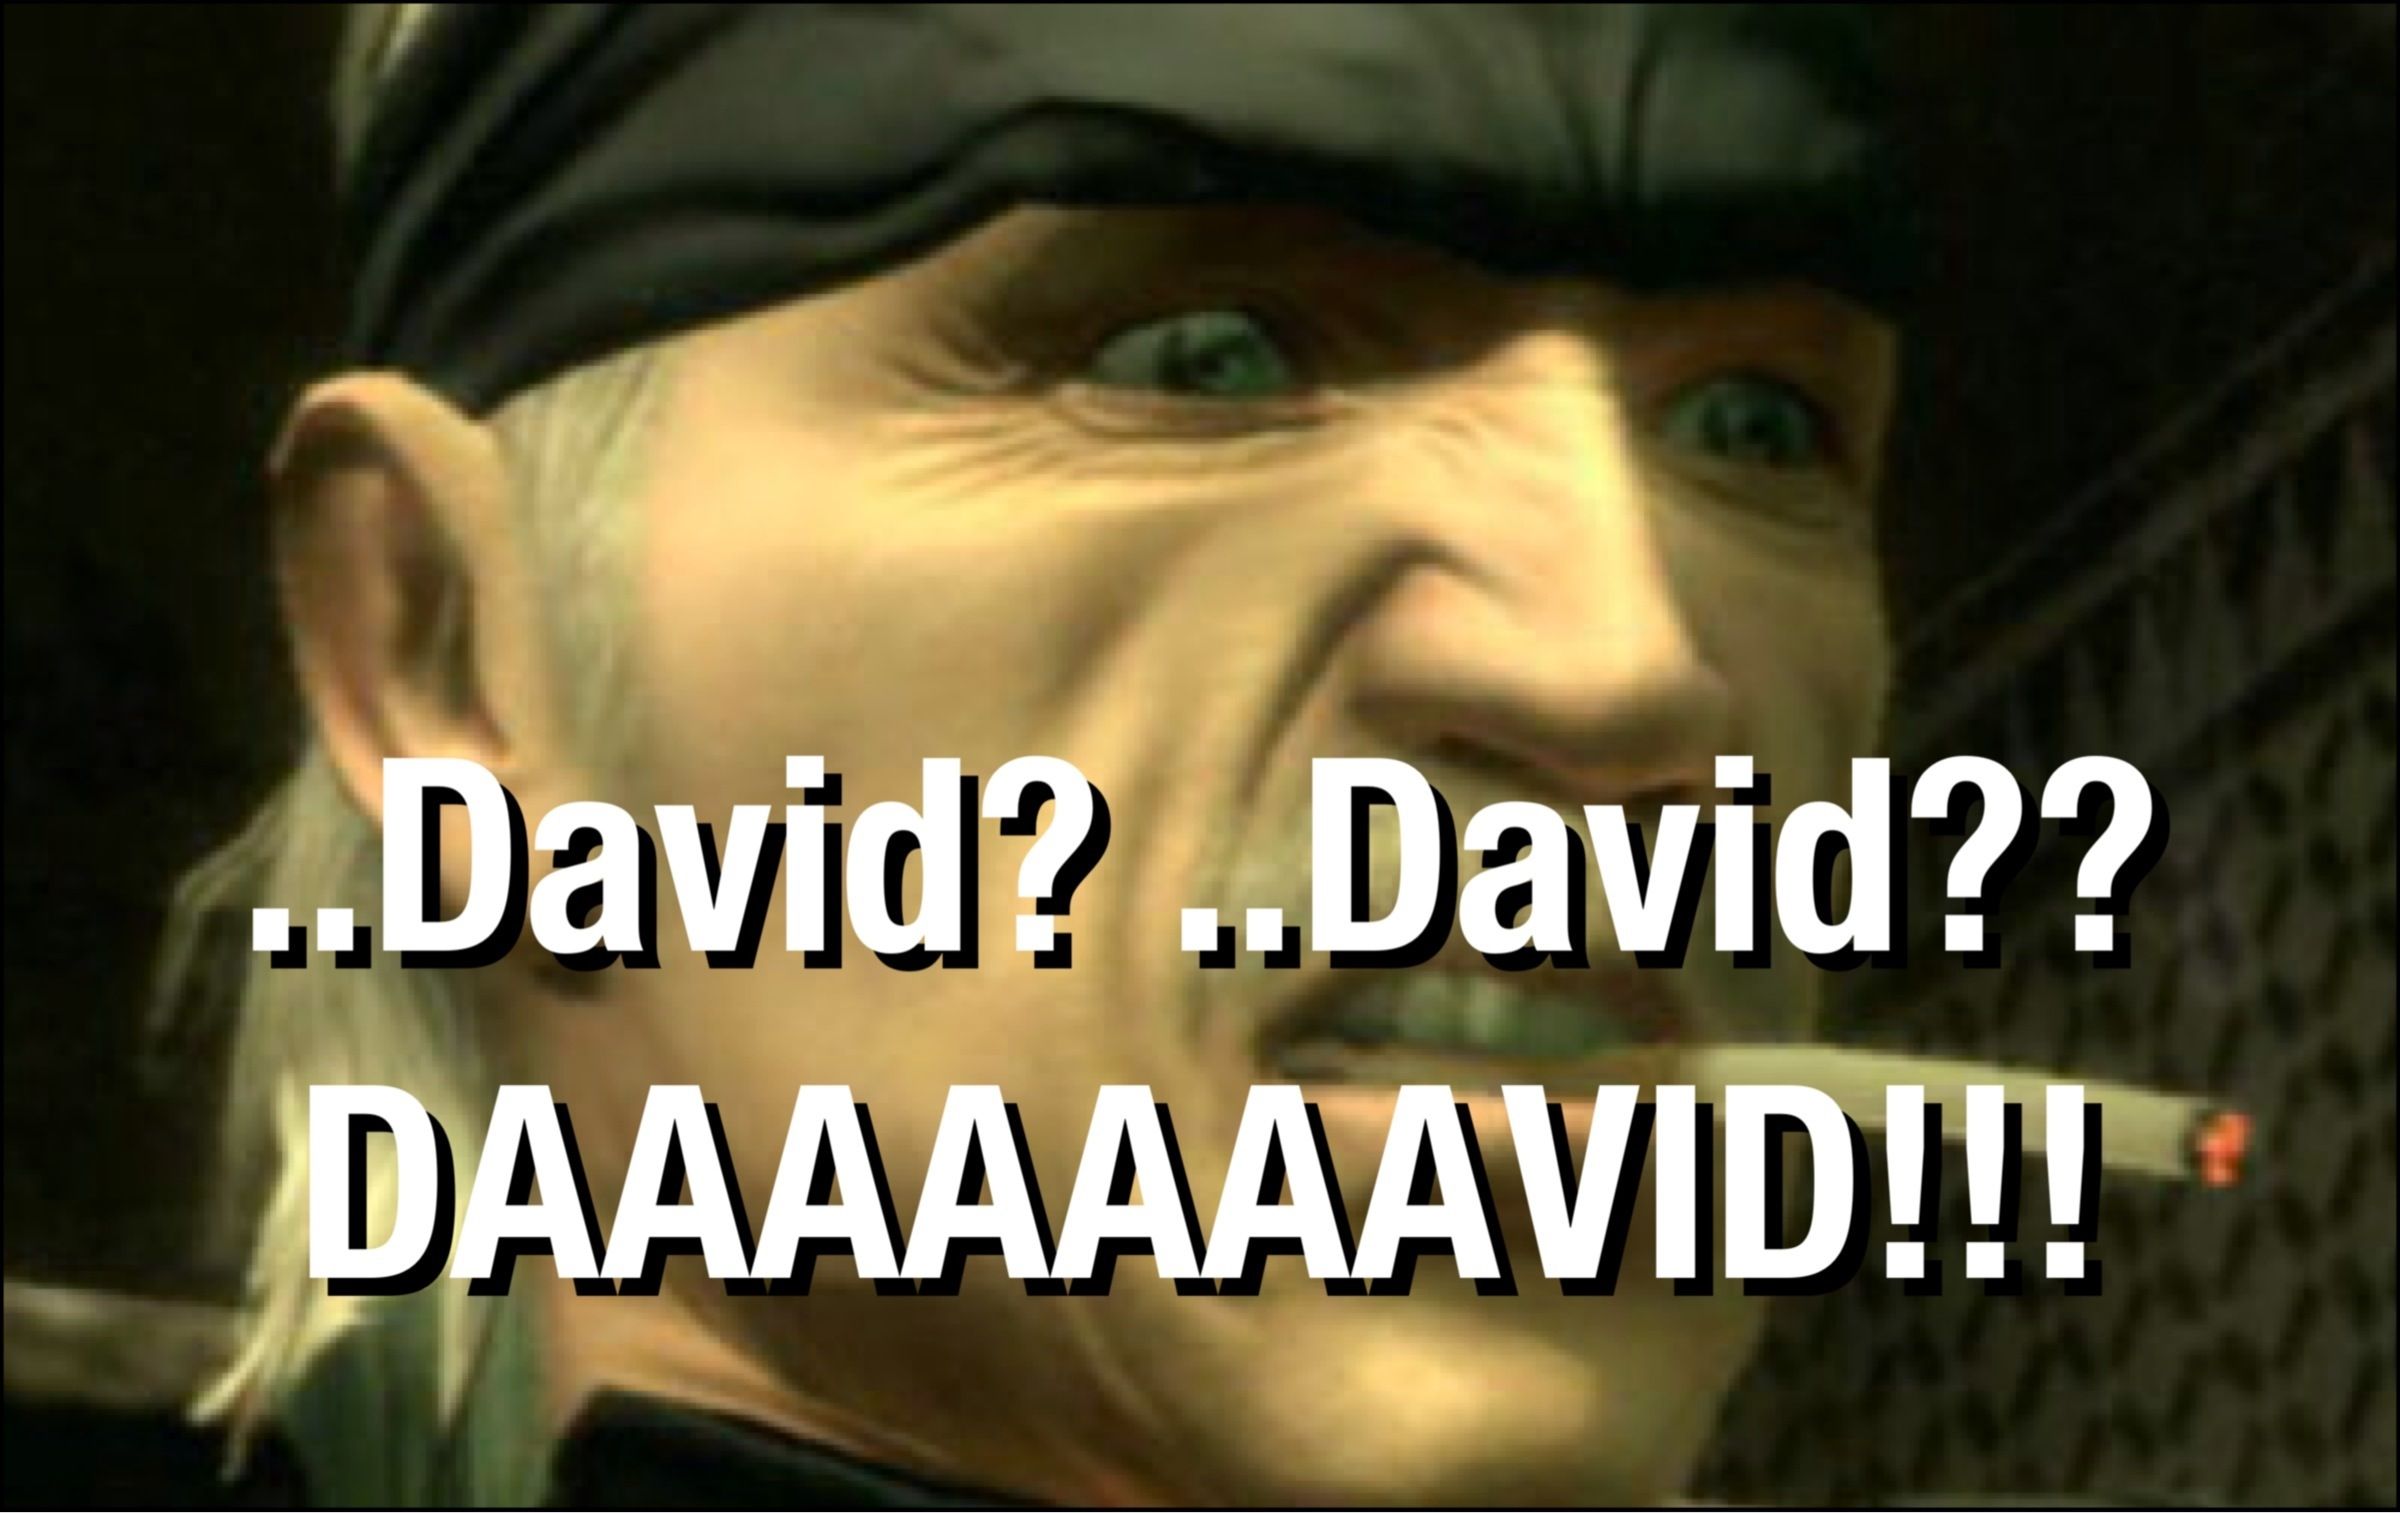 15 Hilarious Metal Gear Solid Memes Only True Fans Will Understand